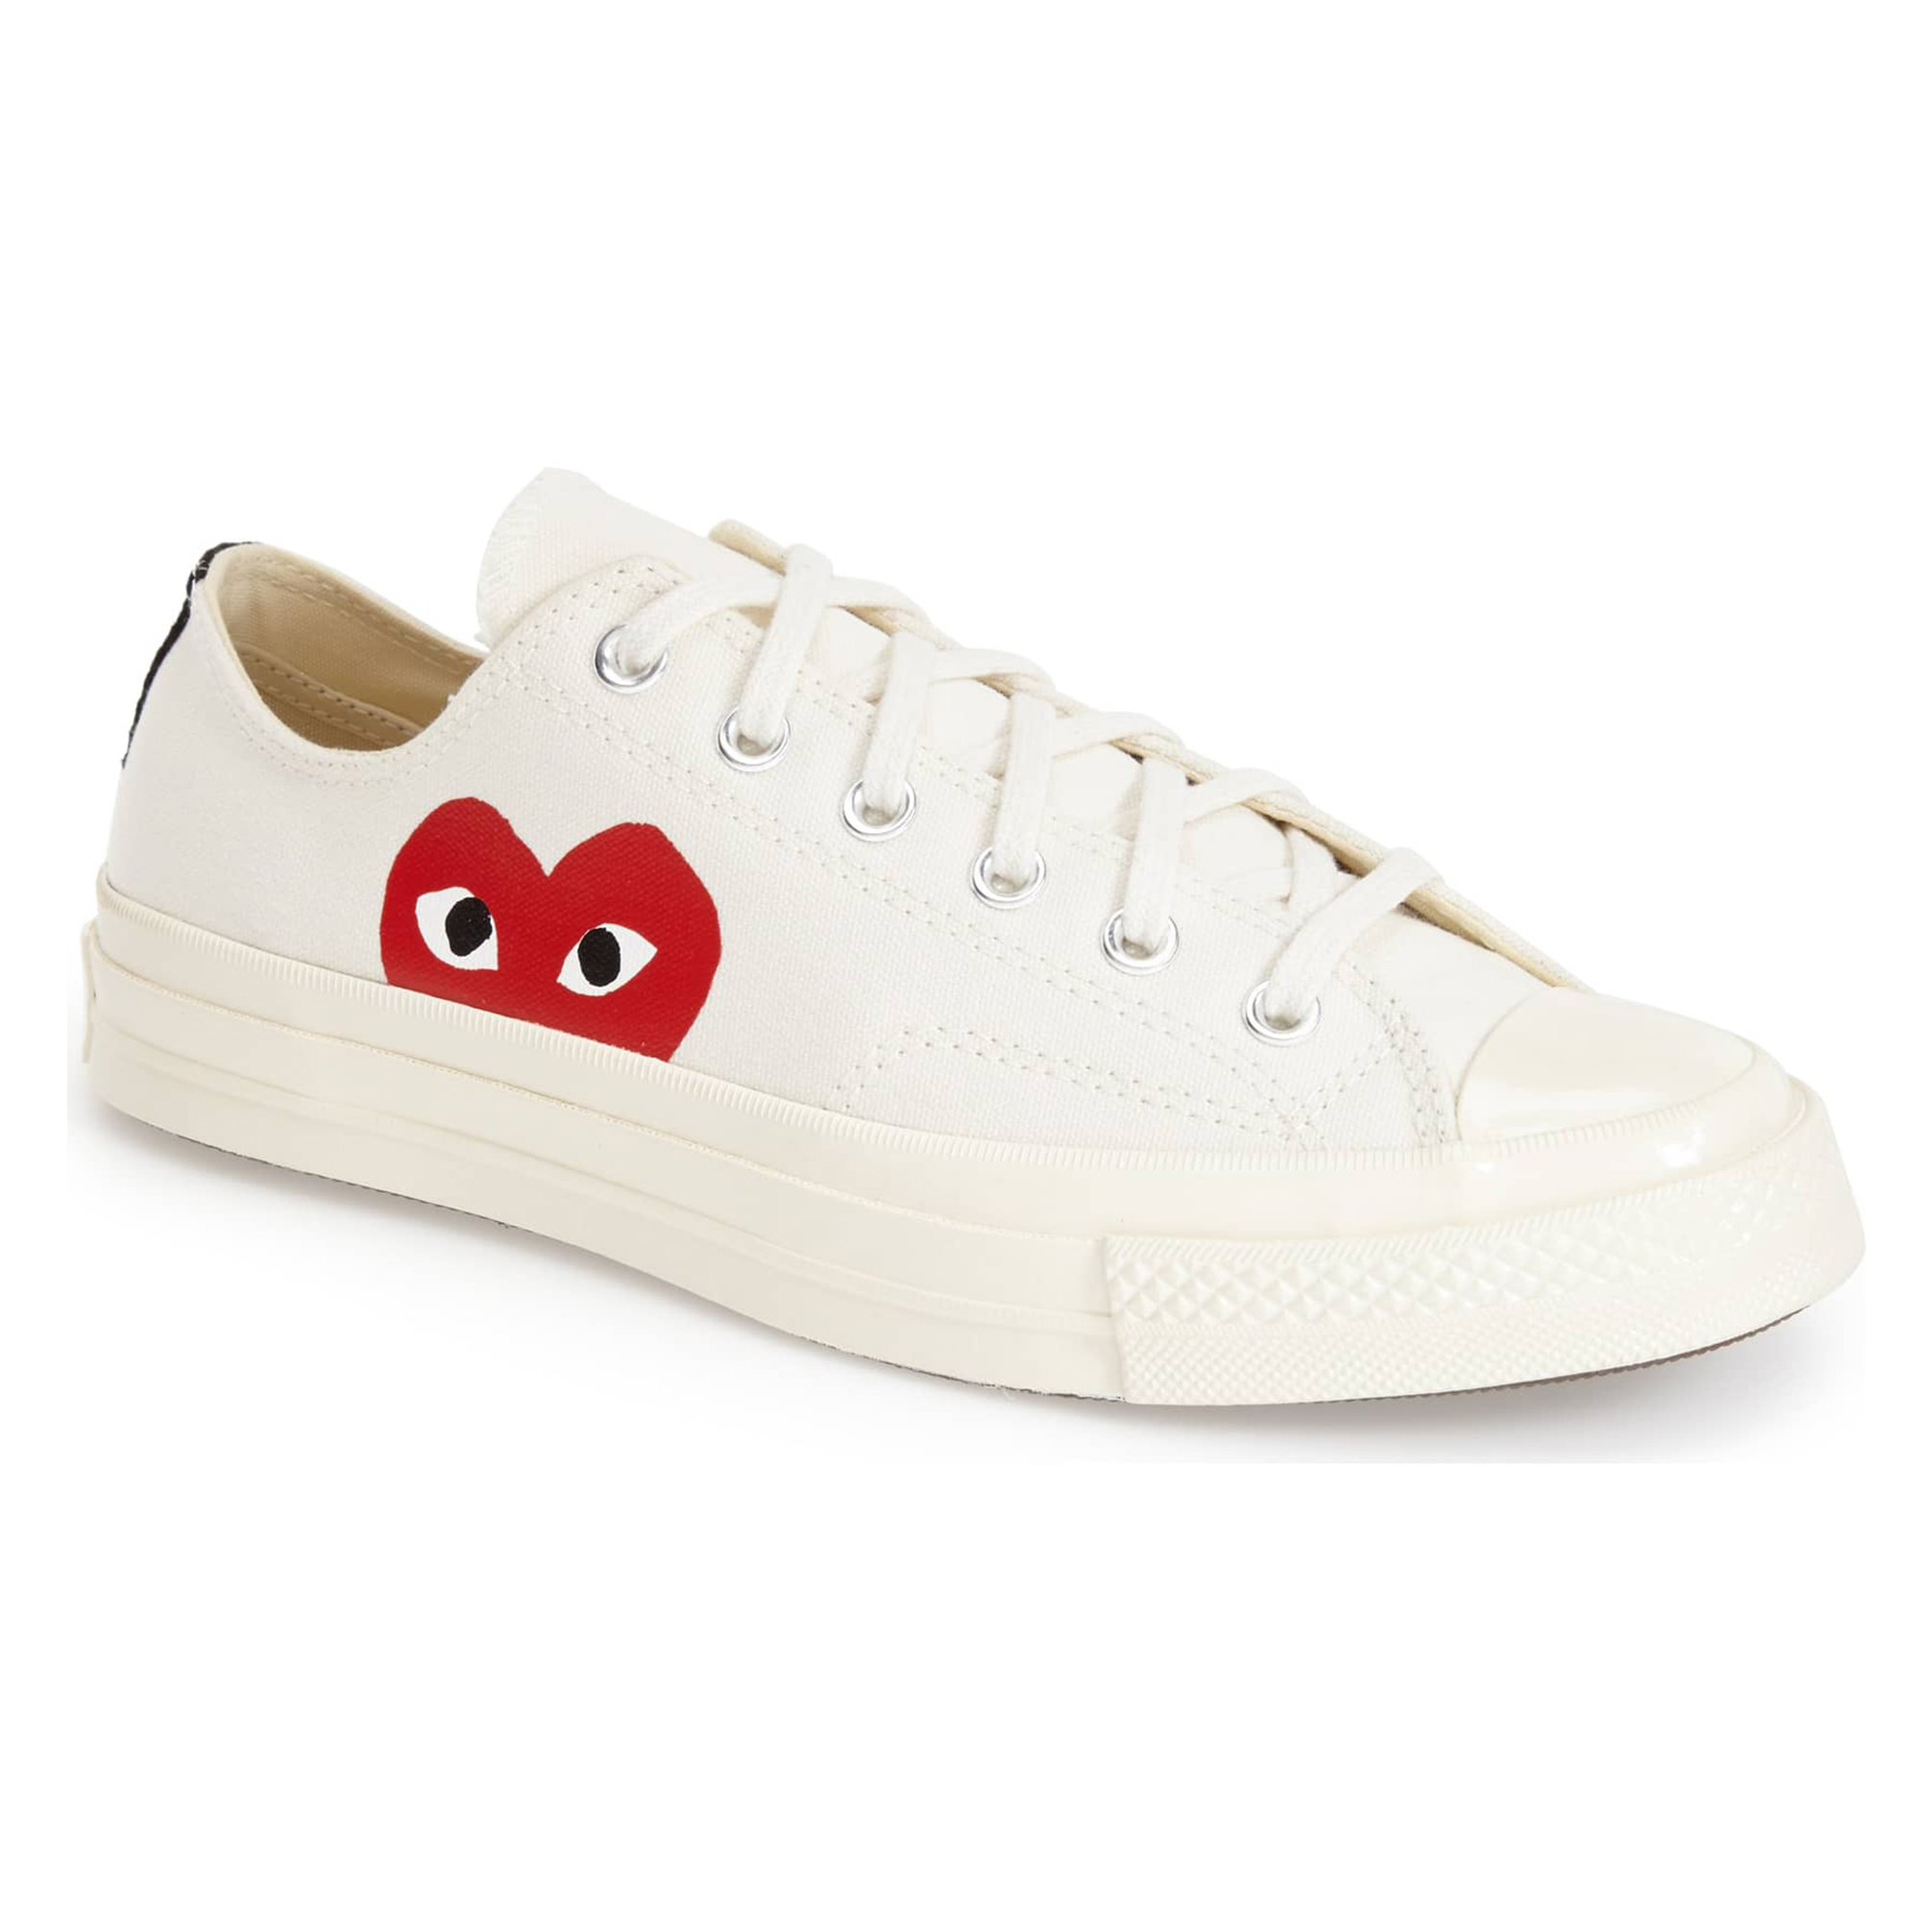 This Converse X Comme des Garcons Sneaker Is Too Cute